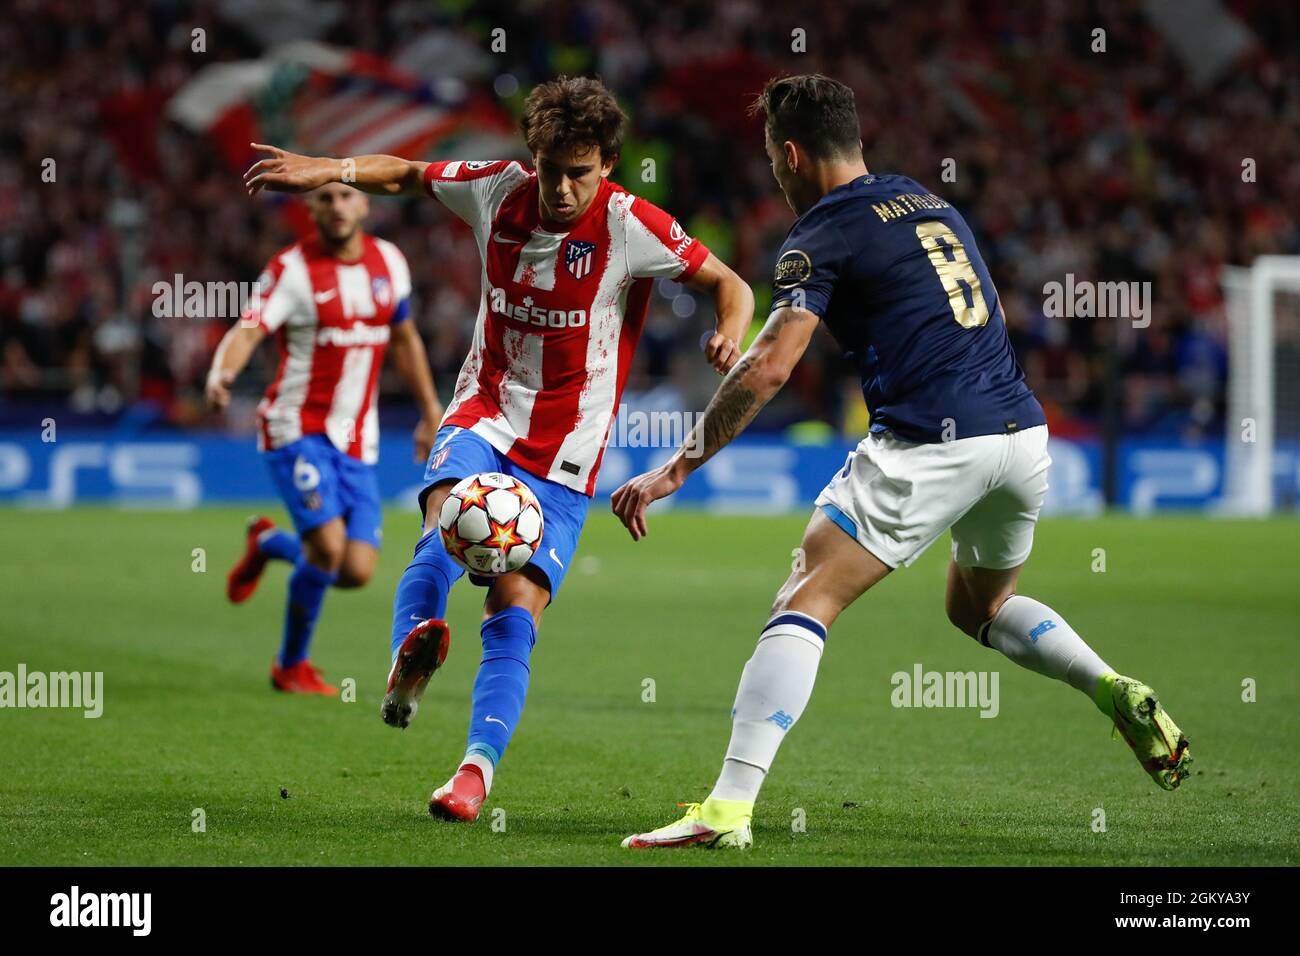 Madrid, Spain. 15th Sep 2021. Joao Felix of Atletico de Madrid in action with Mateus Uribe of FC Porto during the UEFA Champions League match between Atletico de Madrid and FC Porto at Wanda Metropolitano in Madrid, Spain. Credit: DAX Images/Alamy Live News Stock Photo